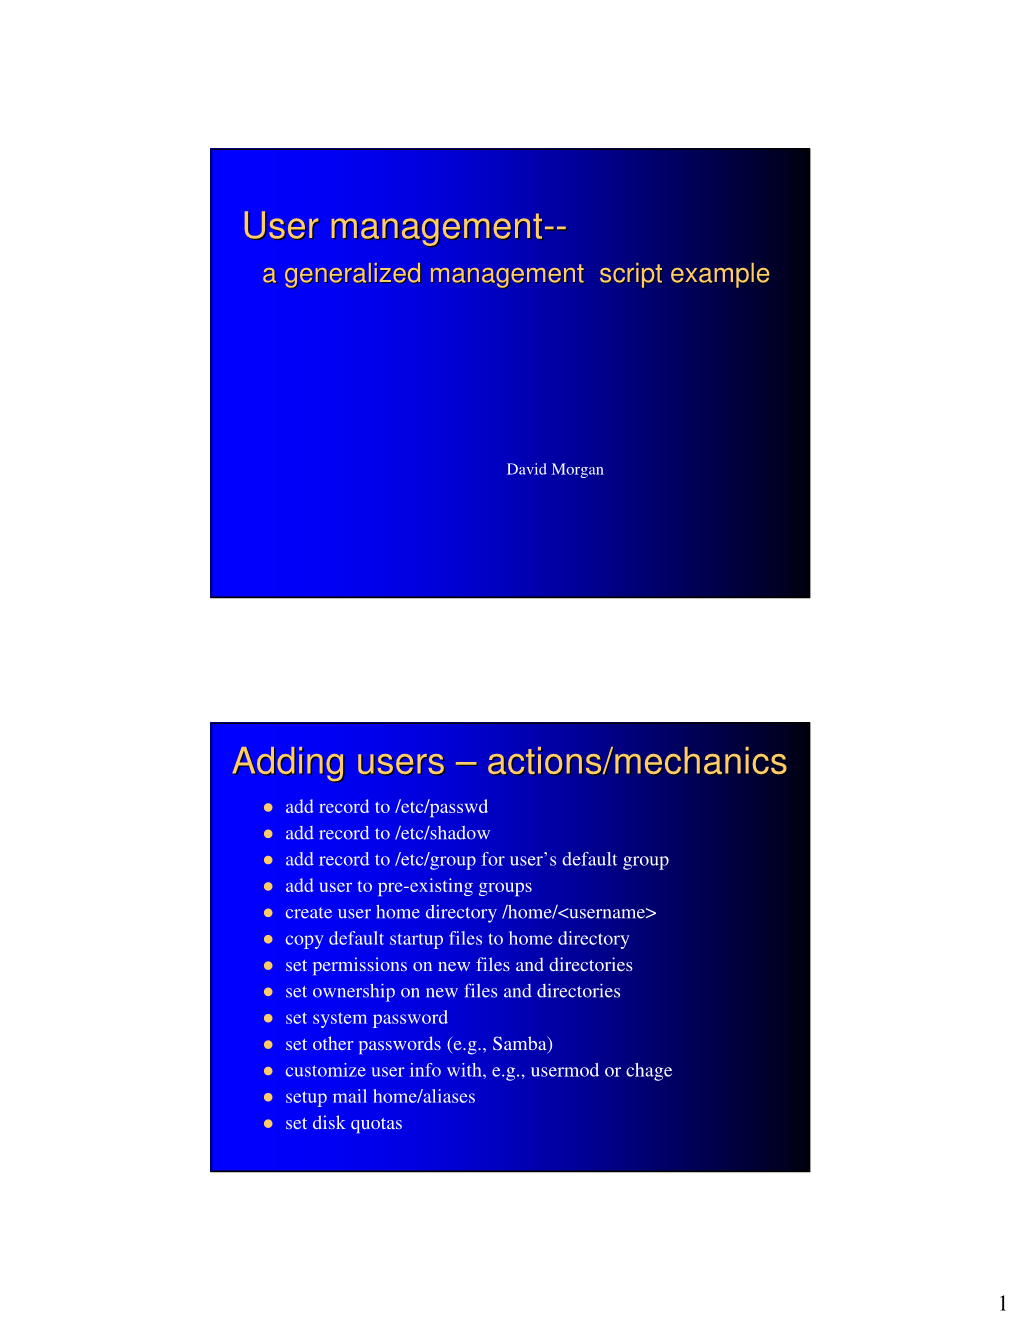 A User Mgmt Script